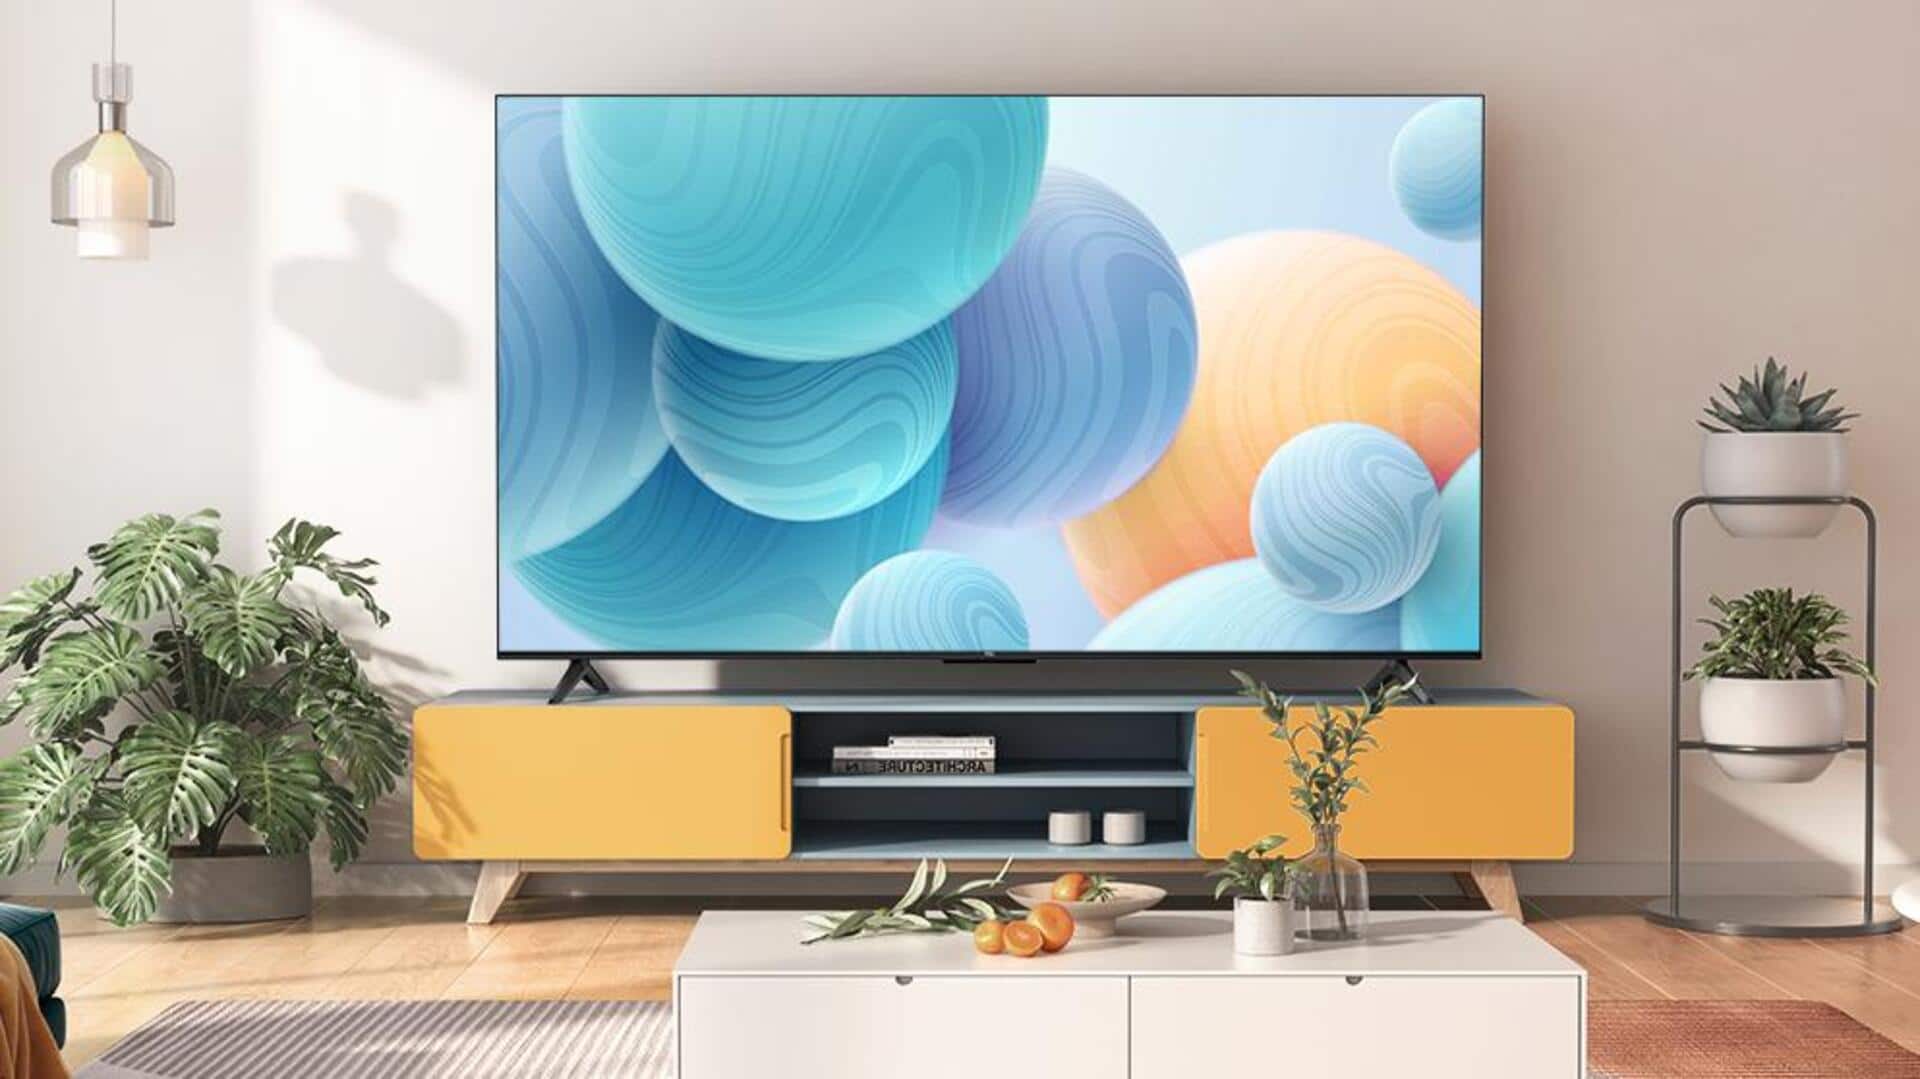 TCL's 65-inch 4K LED TV is 65% off on Amazon